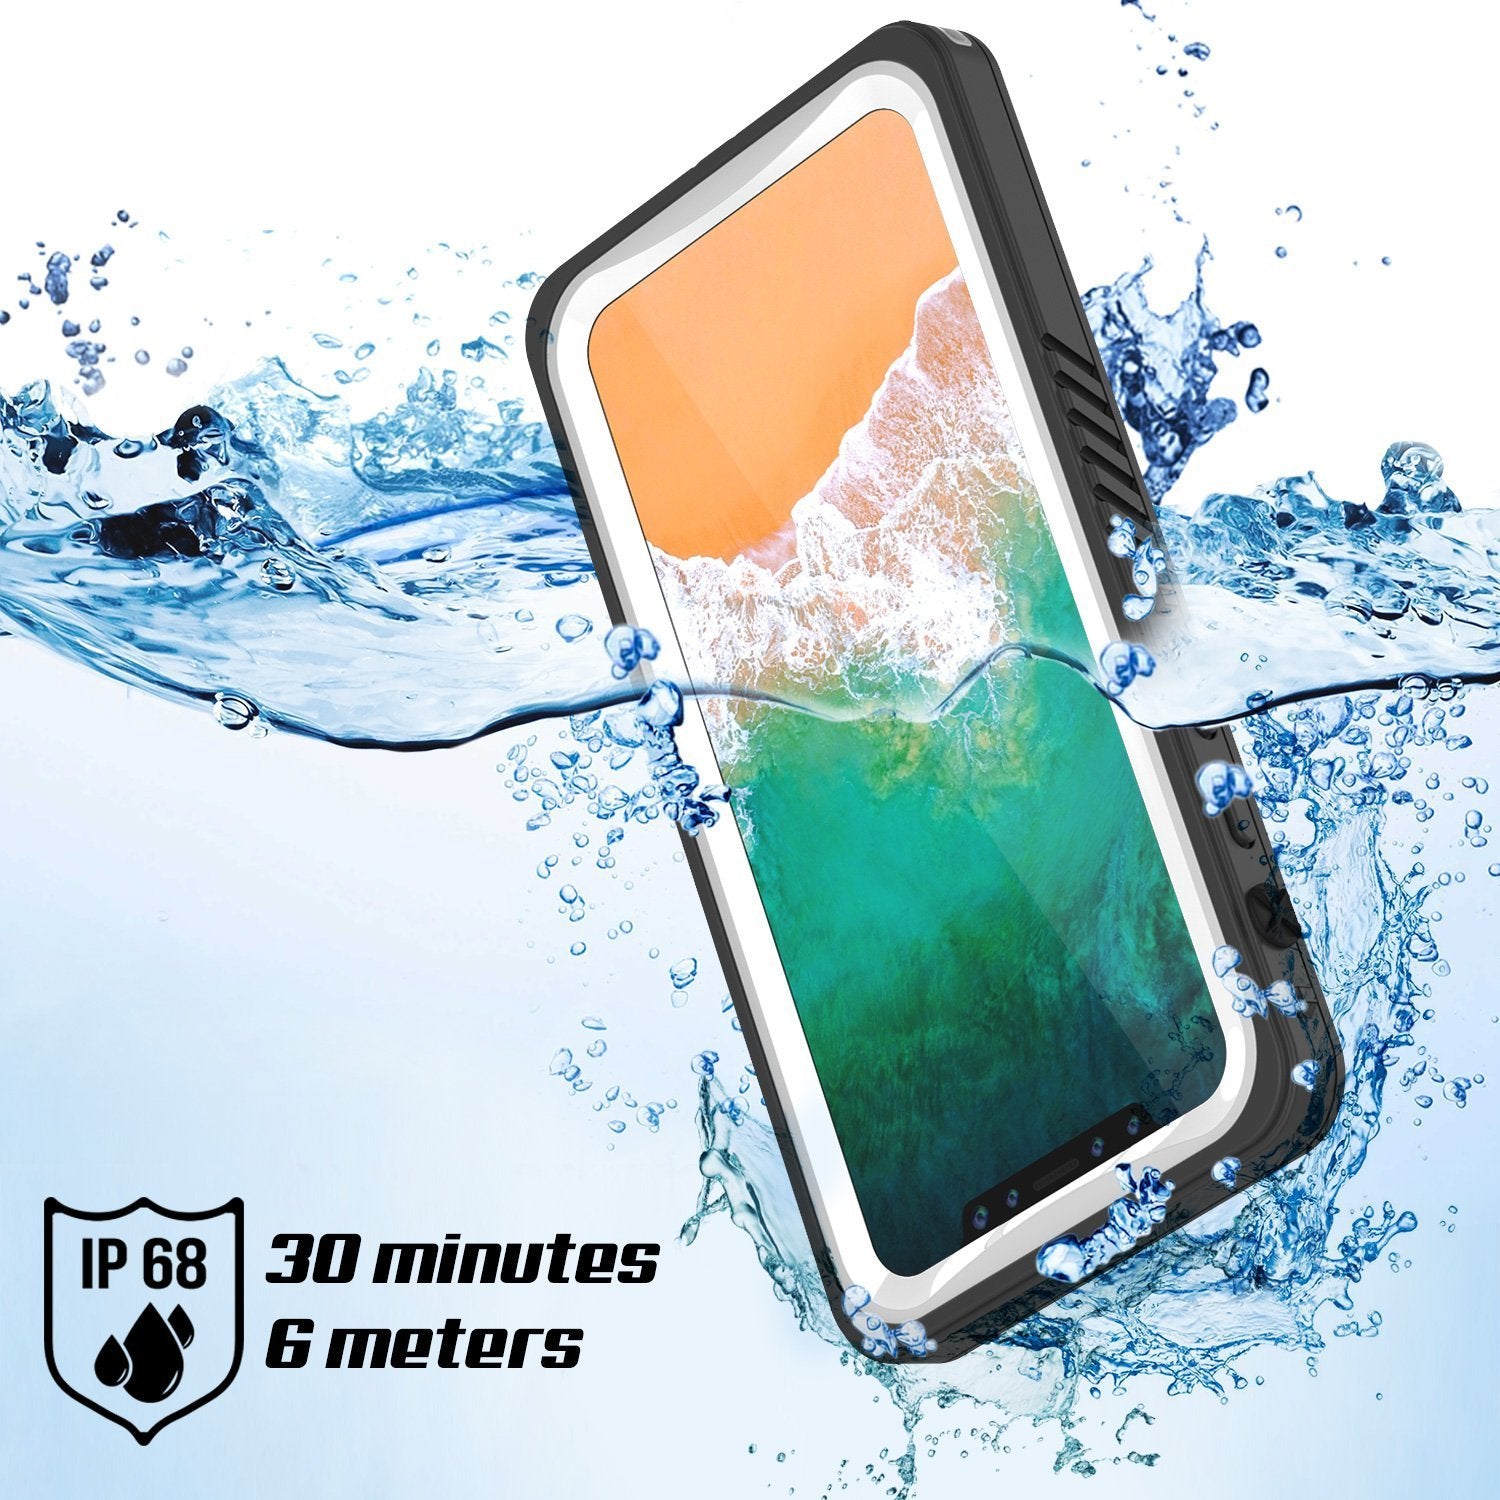 iPhone XS Max Waterproof Case, Punkcase [Extreme Series] Armor Cover W/ Built In Screen Protector [White]